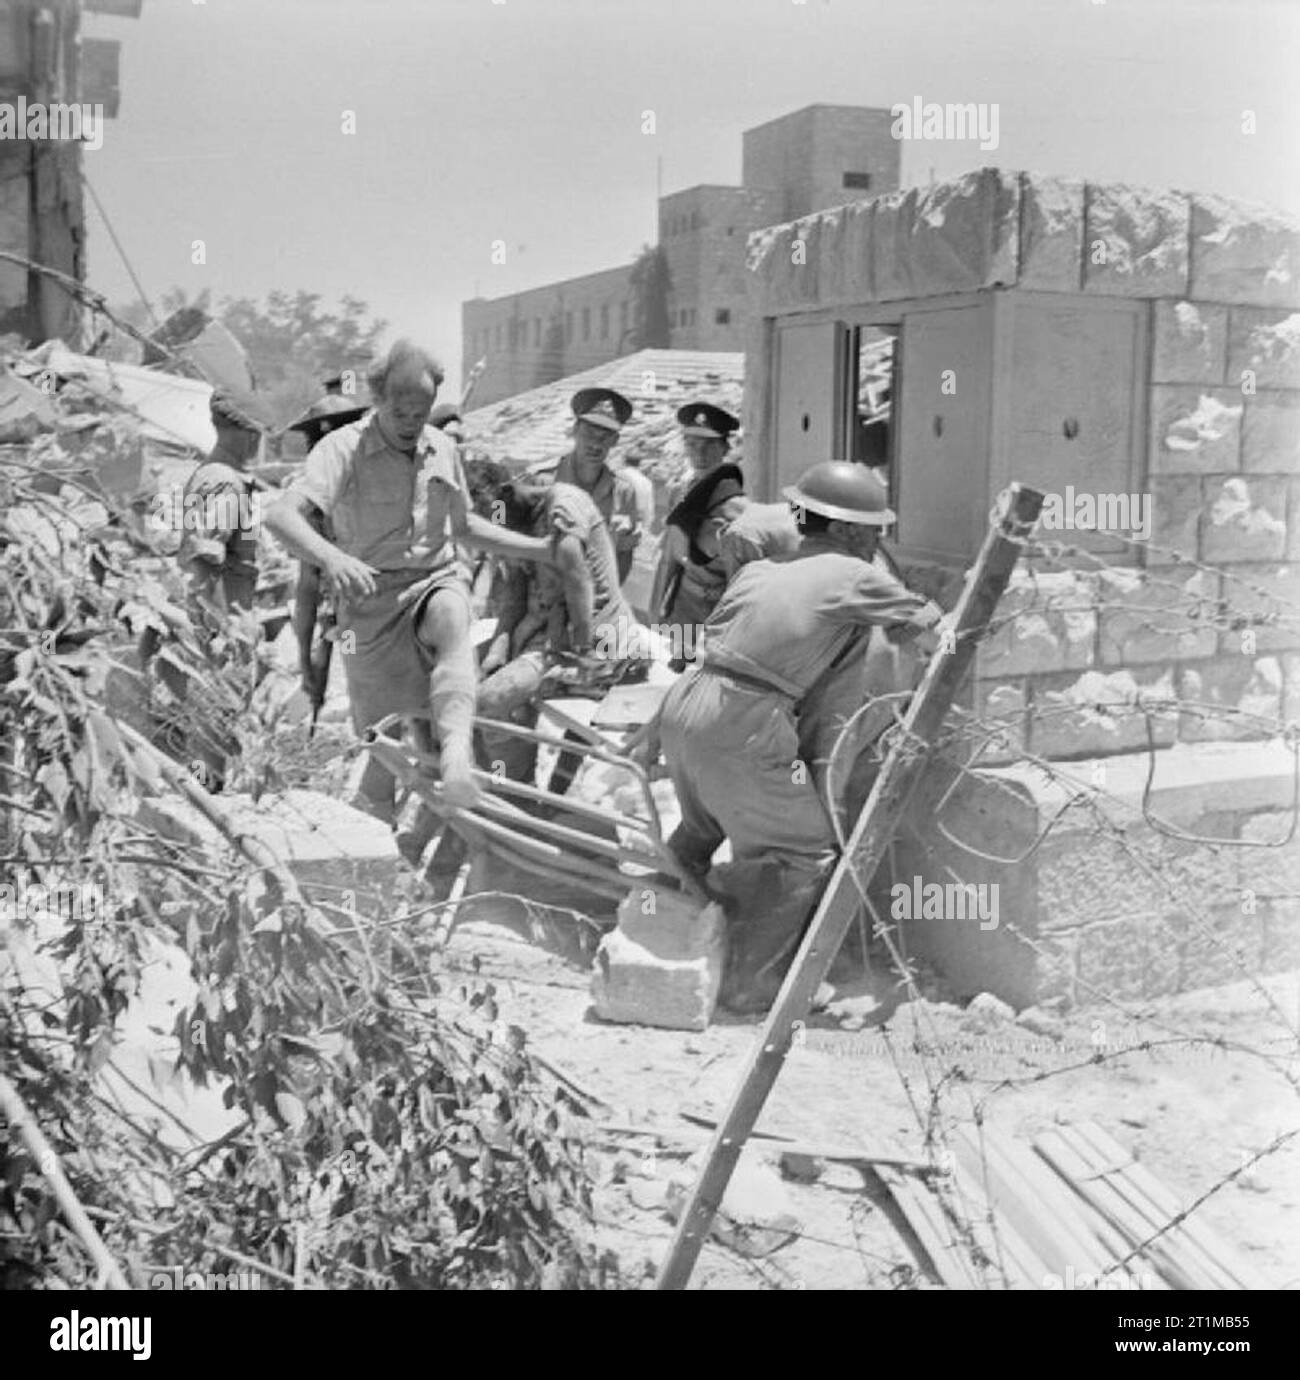 British Forces in the Middle East, 1945-1947 Following the explosions at the King David Hotel in Jerusalem soldiers and members of the Palestine Police work to rescue victims from the wreckage. The hotel housed the Military headquarters for all armed forces in Palestine as well as the offices of the Palestine Government. The attack on the hotel was the biggest blow struck against British rule in Palestine by fighters of the Jewish 'Irgun' organisation. Stock Photo